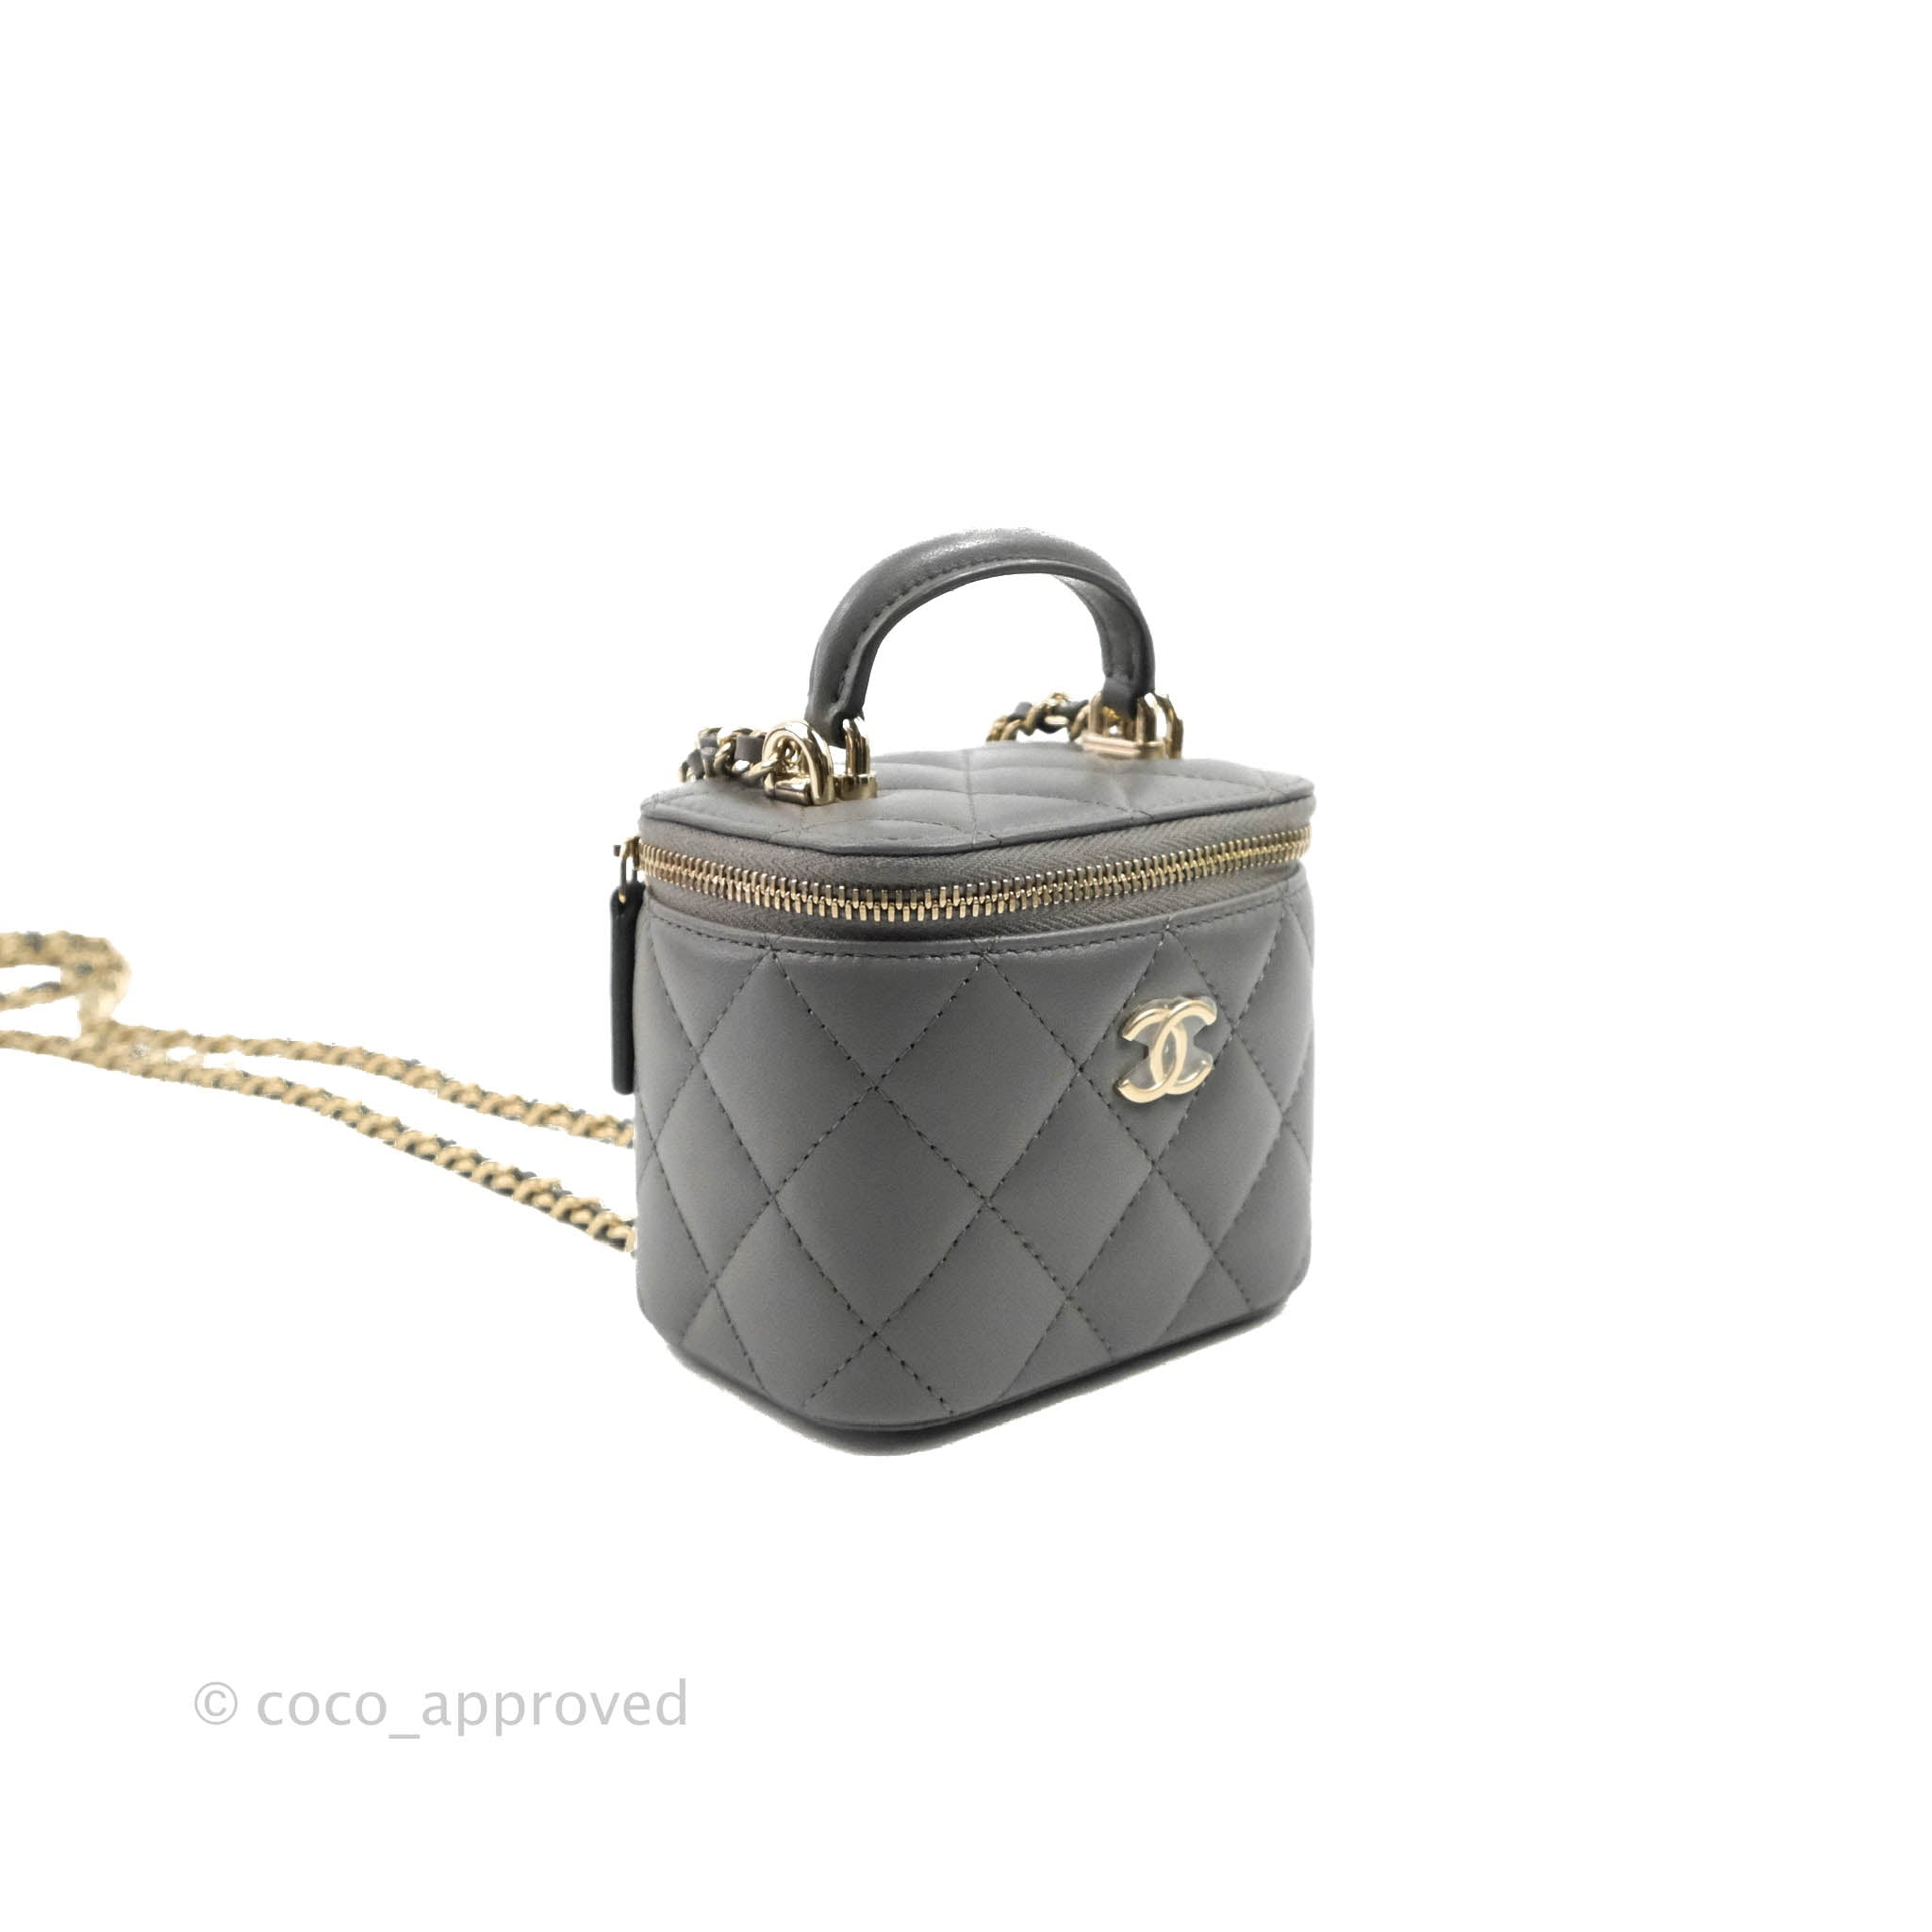 BRAND NEW ! Chanel Black Lambskin Metal Top Handle Small Vanity with Chain  Gold Hardware Crossbody Bag (J0046KN9) - The Attic Place